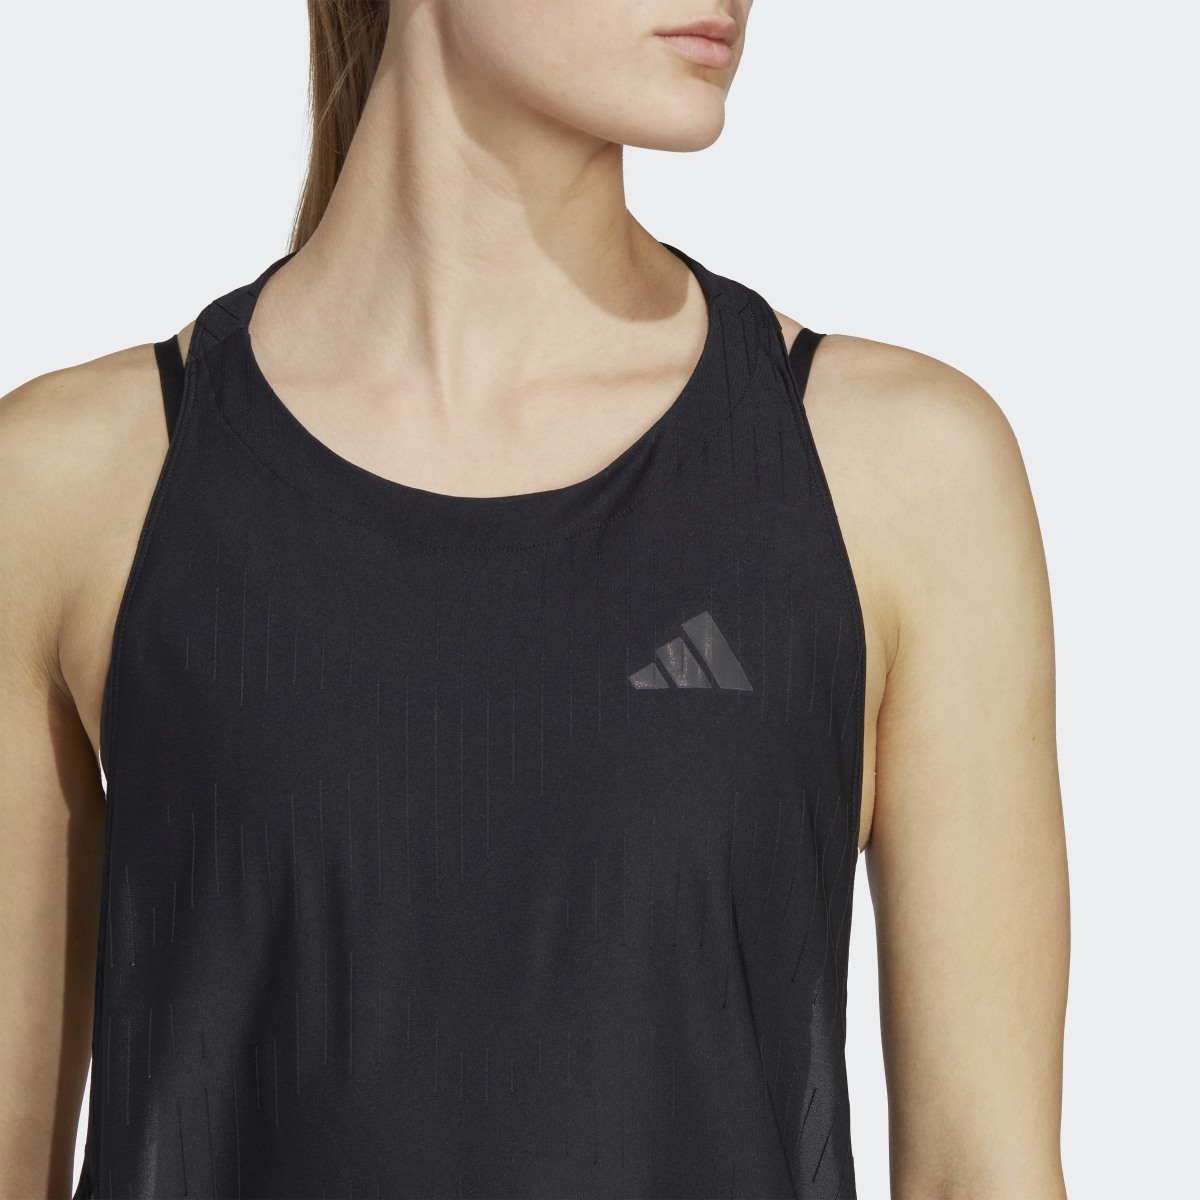 Adidas Made to be Remade Running Tank Top. 7